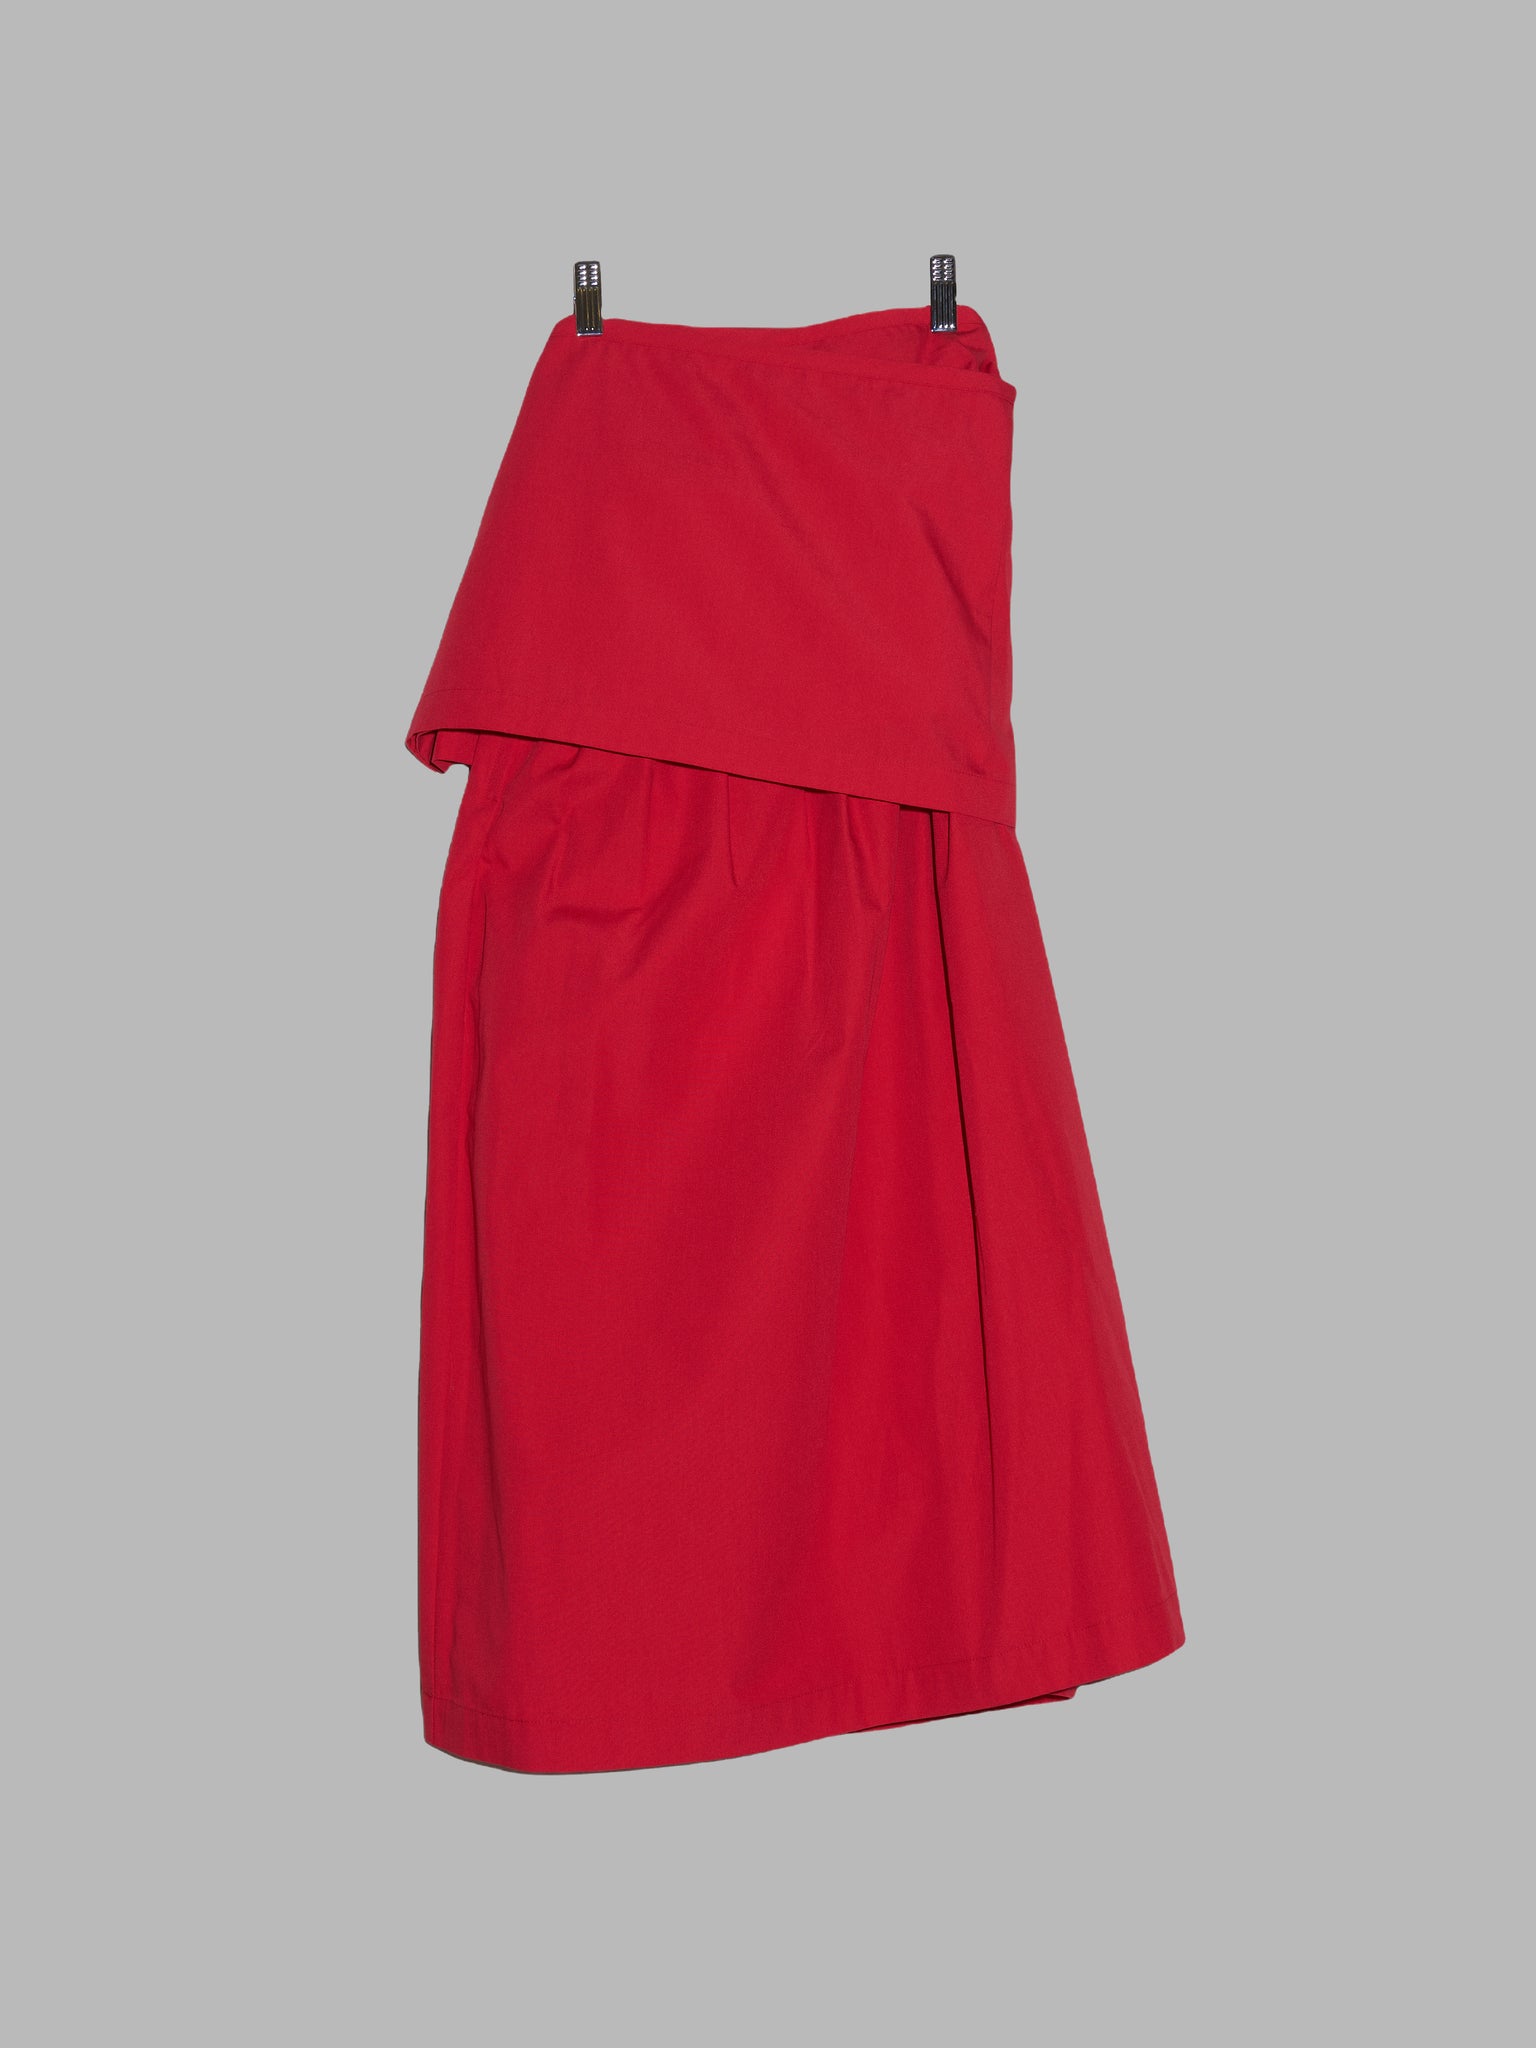 Tricot Comme des Garcons 1998 red poly-cotton layered wrap skirt - S